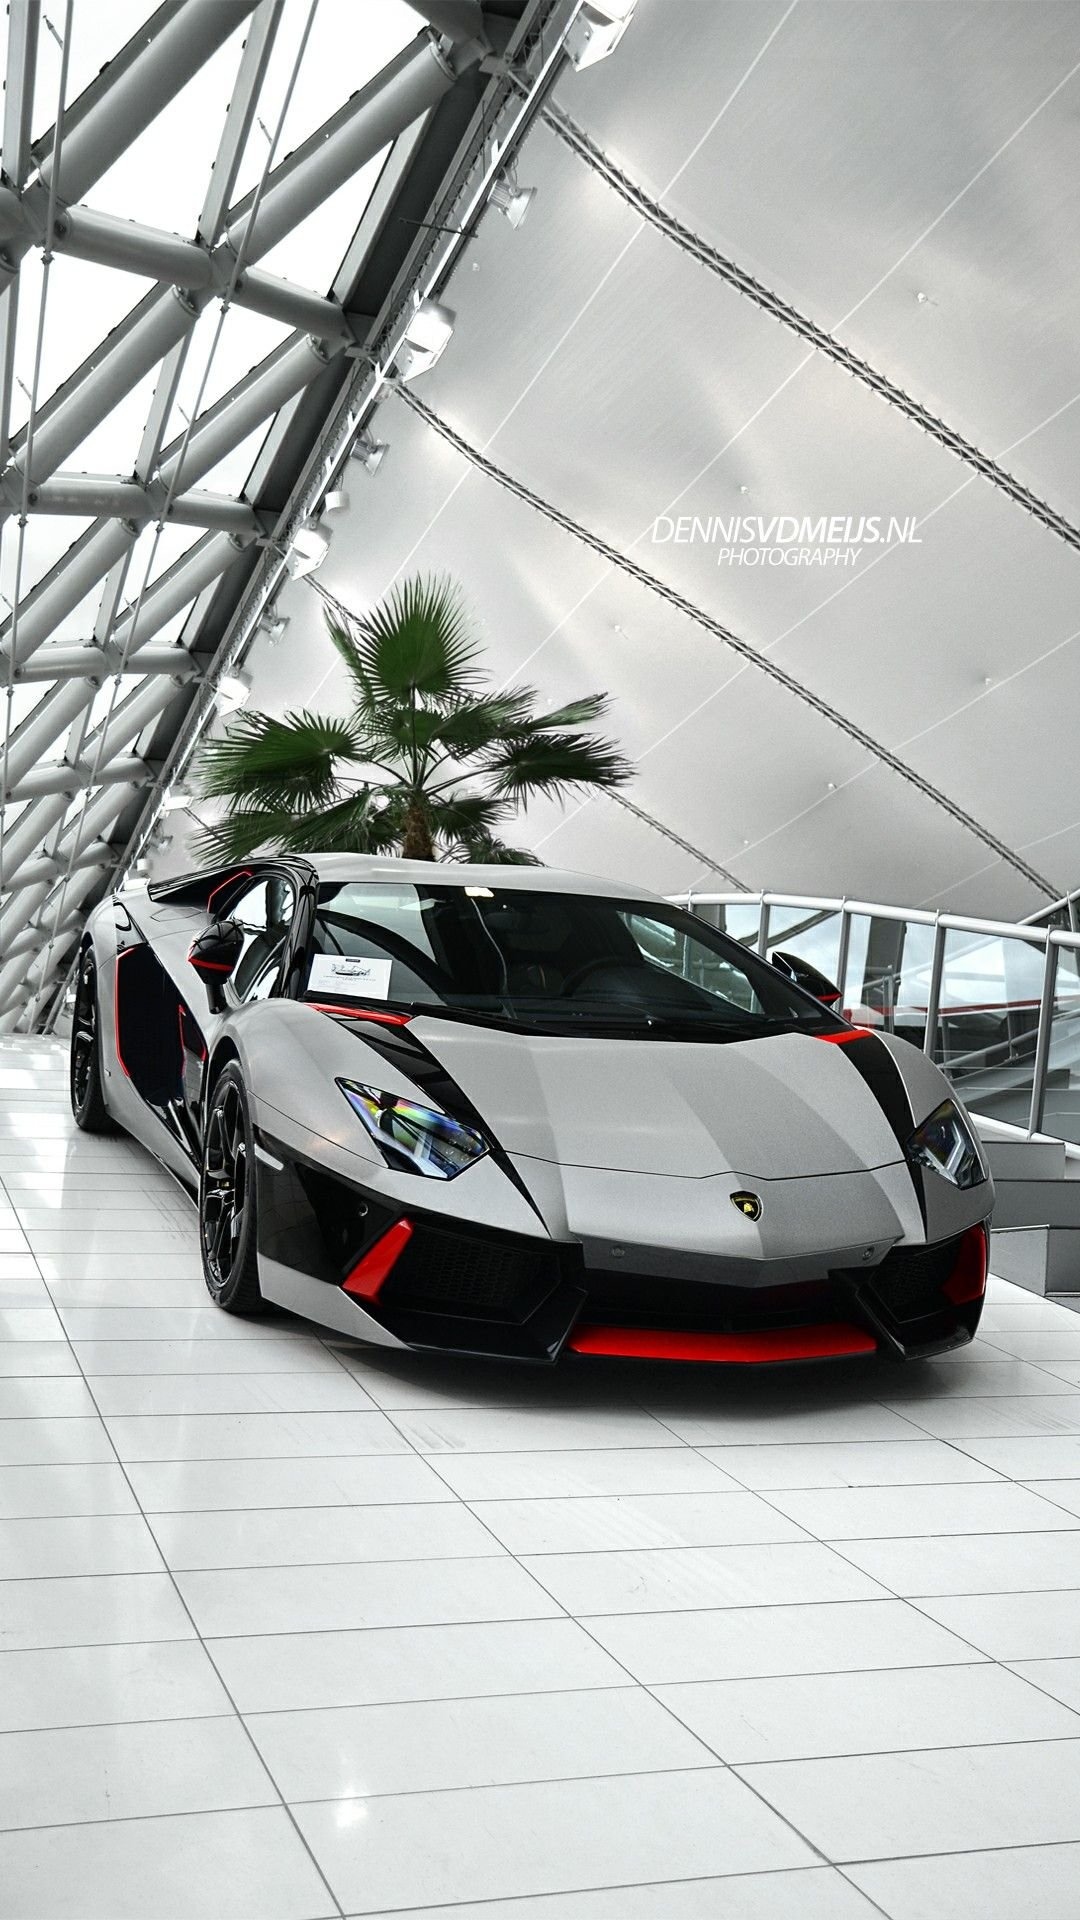 Lamborghini cell phone wallpapers, High-resolution images, Iconic sports cars, Speed and luxury, 1080x1920 Full HD Handy